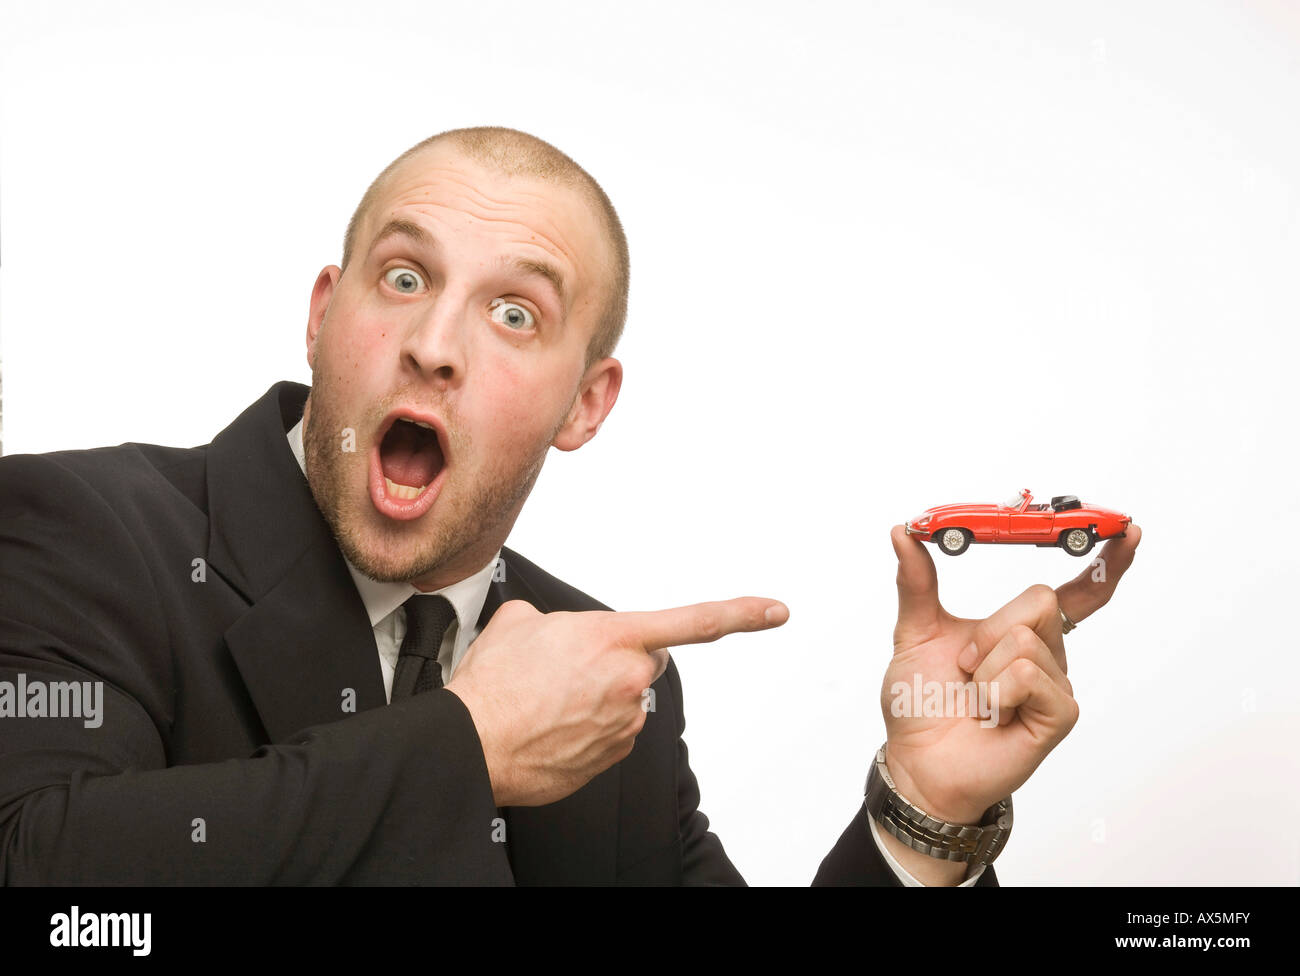 Young man holding model car Stock Photo